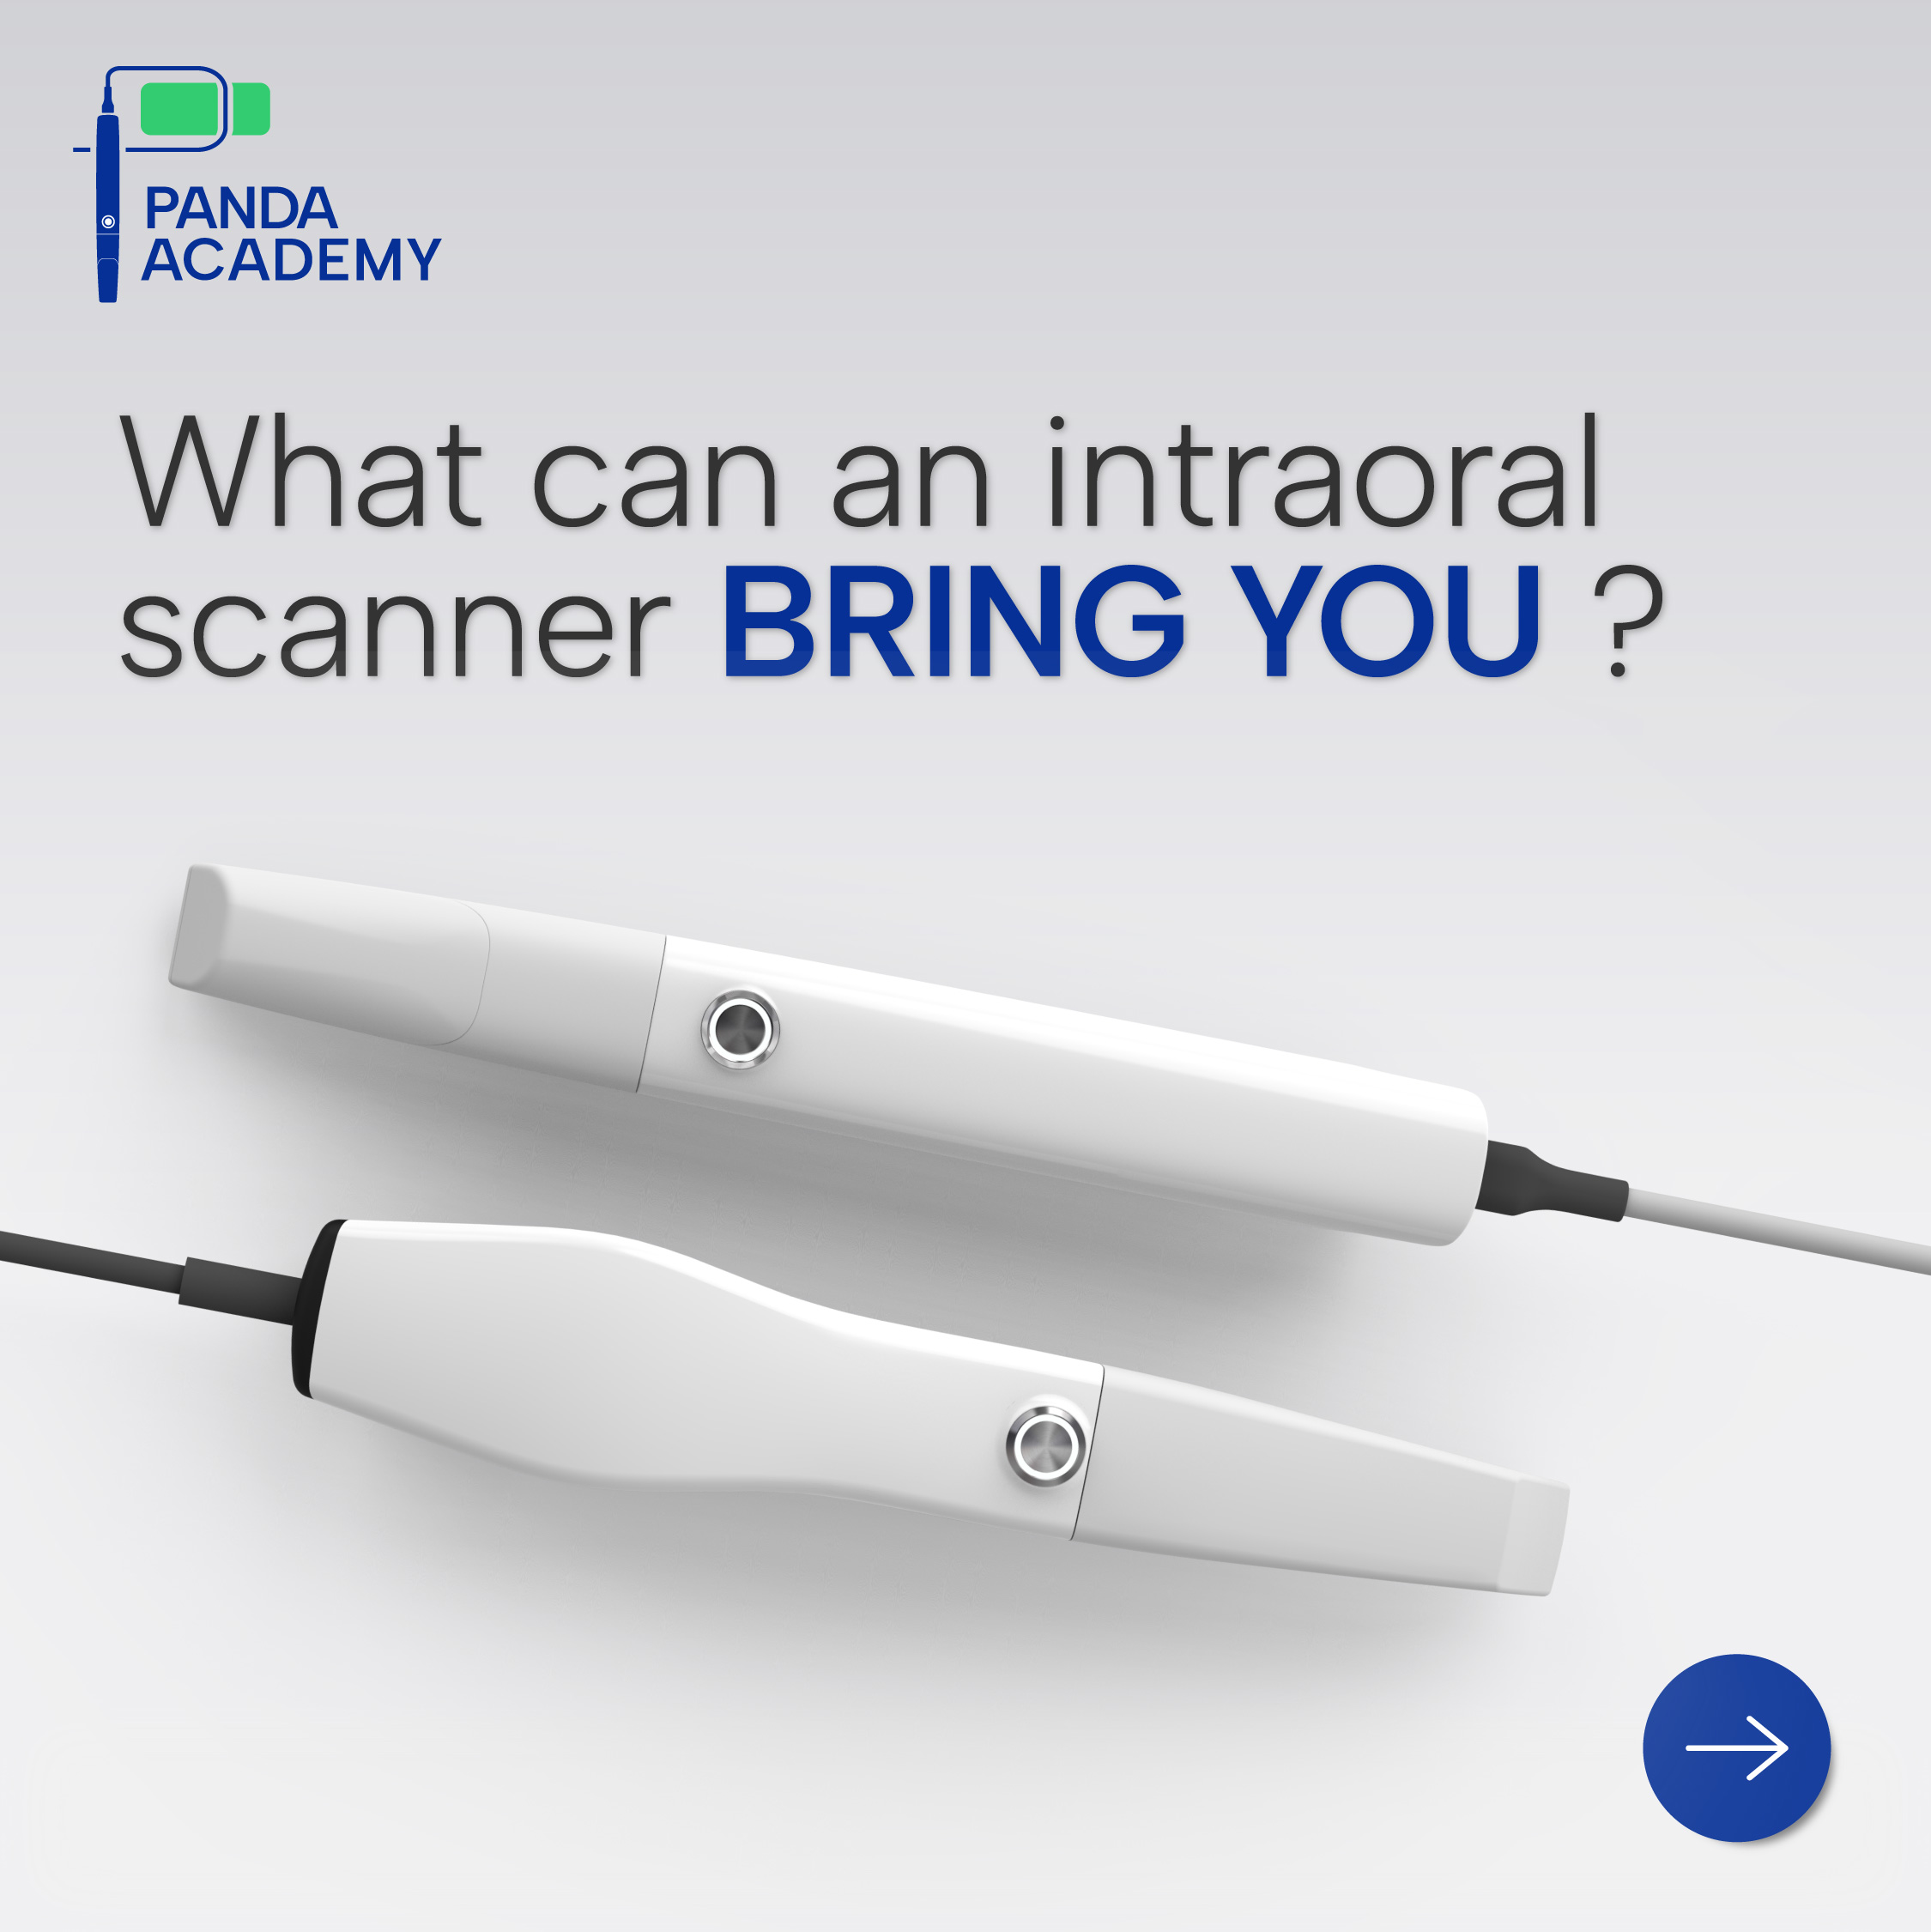 PANDA ACADEMY: What can an intraoral scanner bring you?